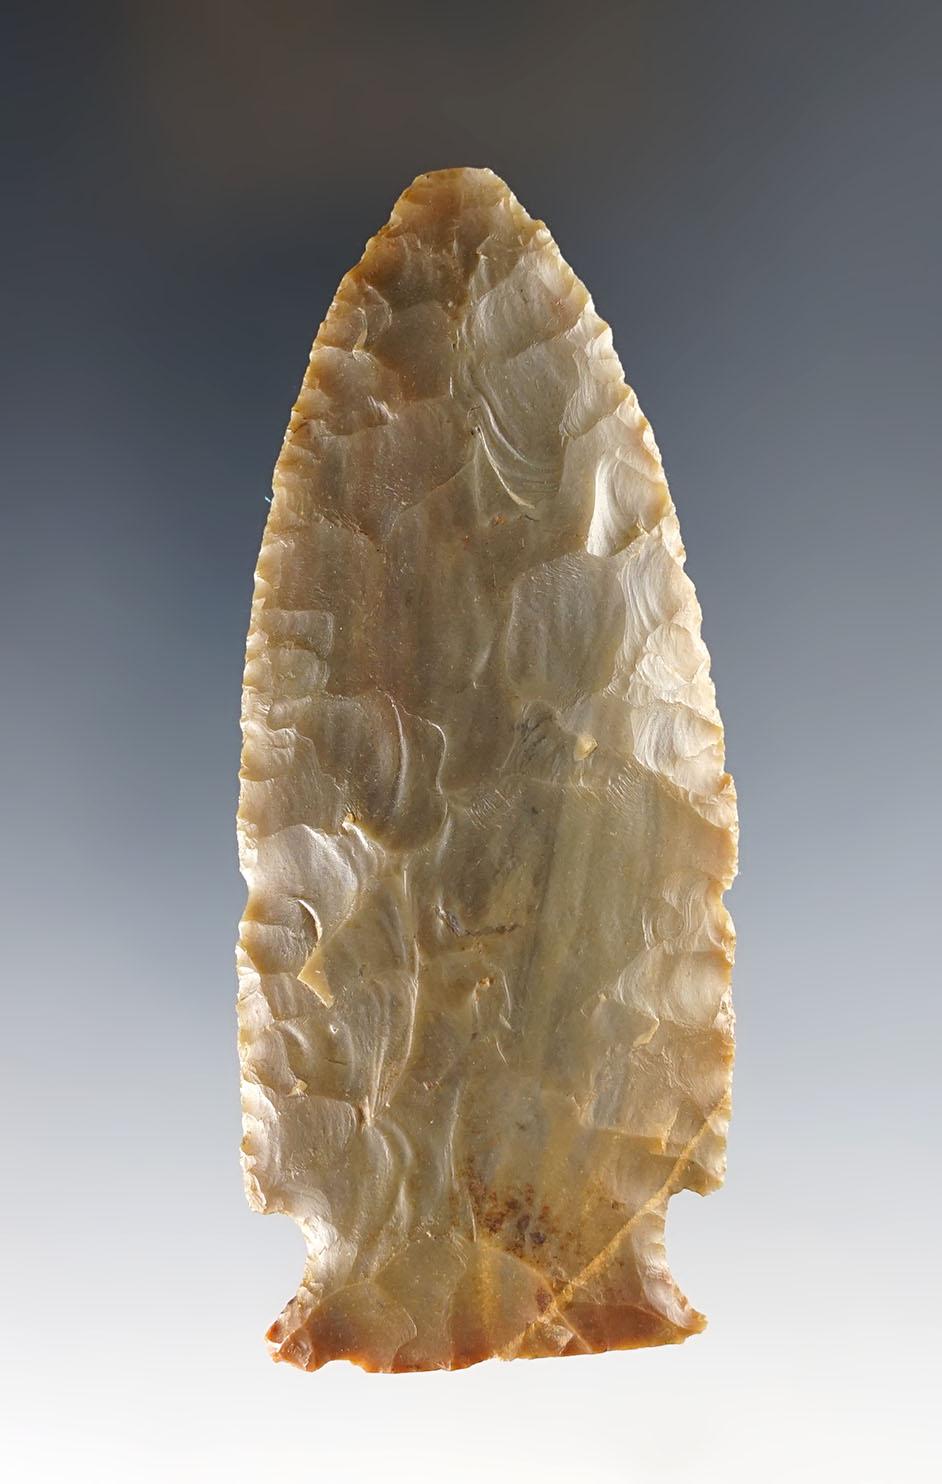 Incredible 3 11/16" Intrusive Mound made from multi-colored Carter Cave Flint.